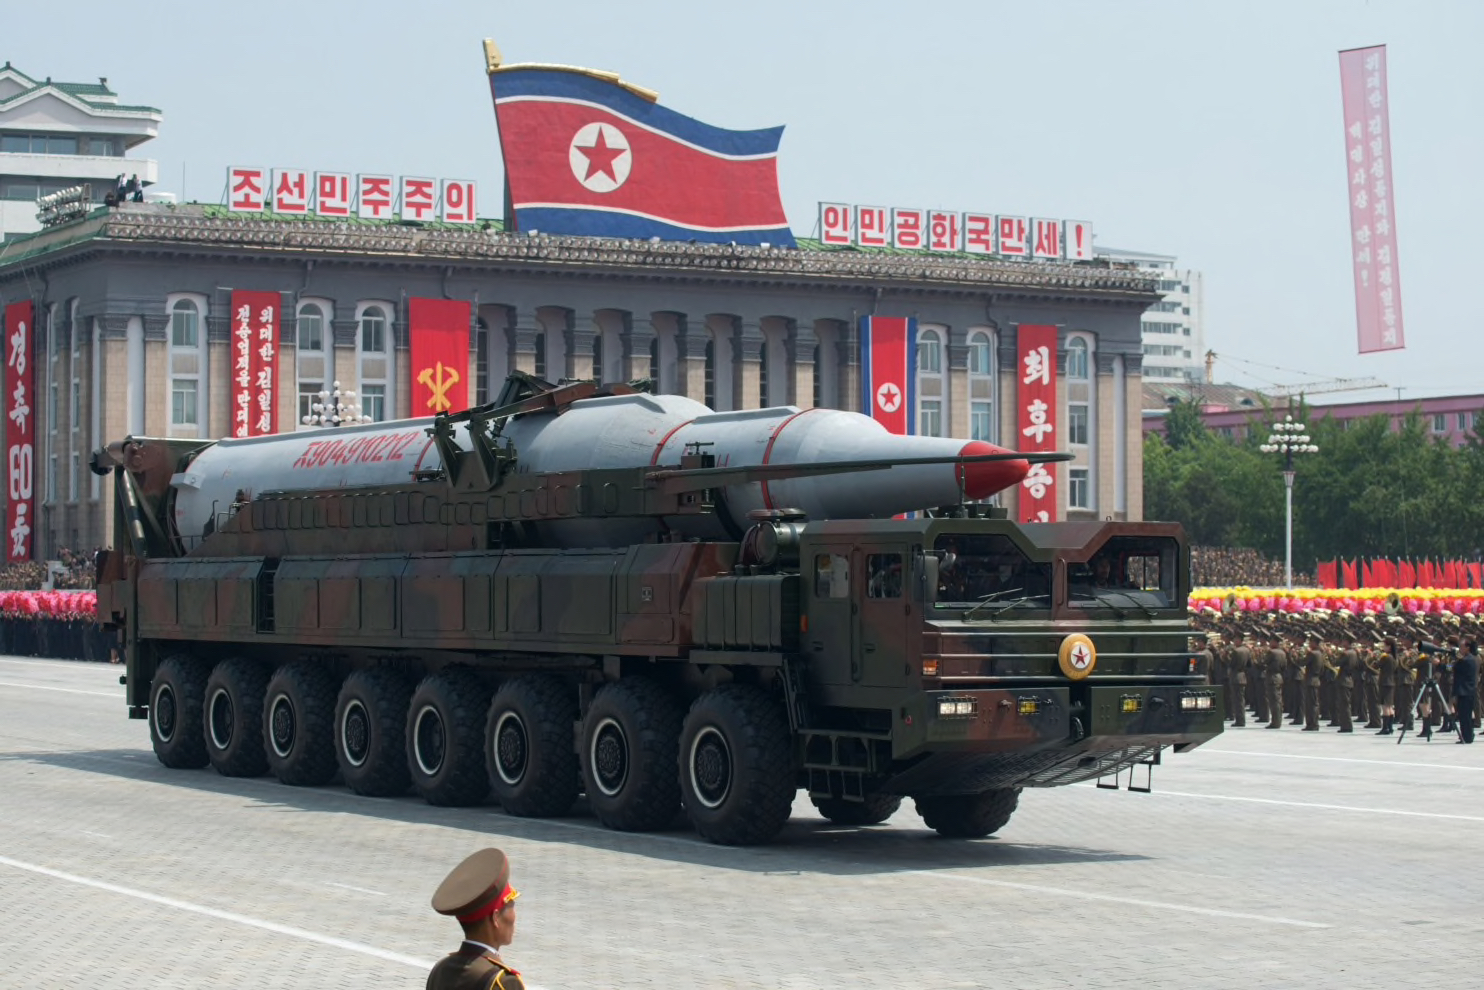 A North Korean Taepodong-class missile is displayed during a military parade marking the 60th anniversary of the Korean War armistice in Pyongyang on July 27, 2013. (Ed Jones/AFP/Getty Images)